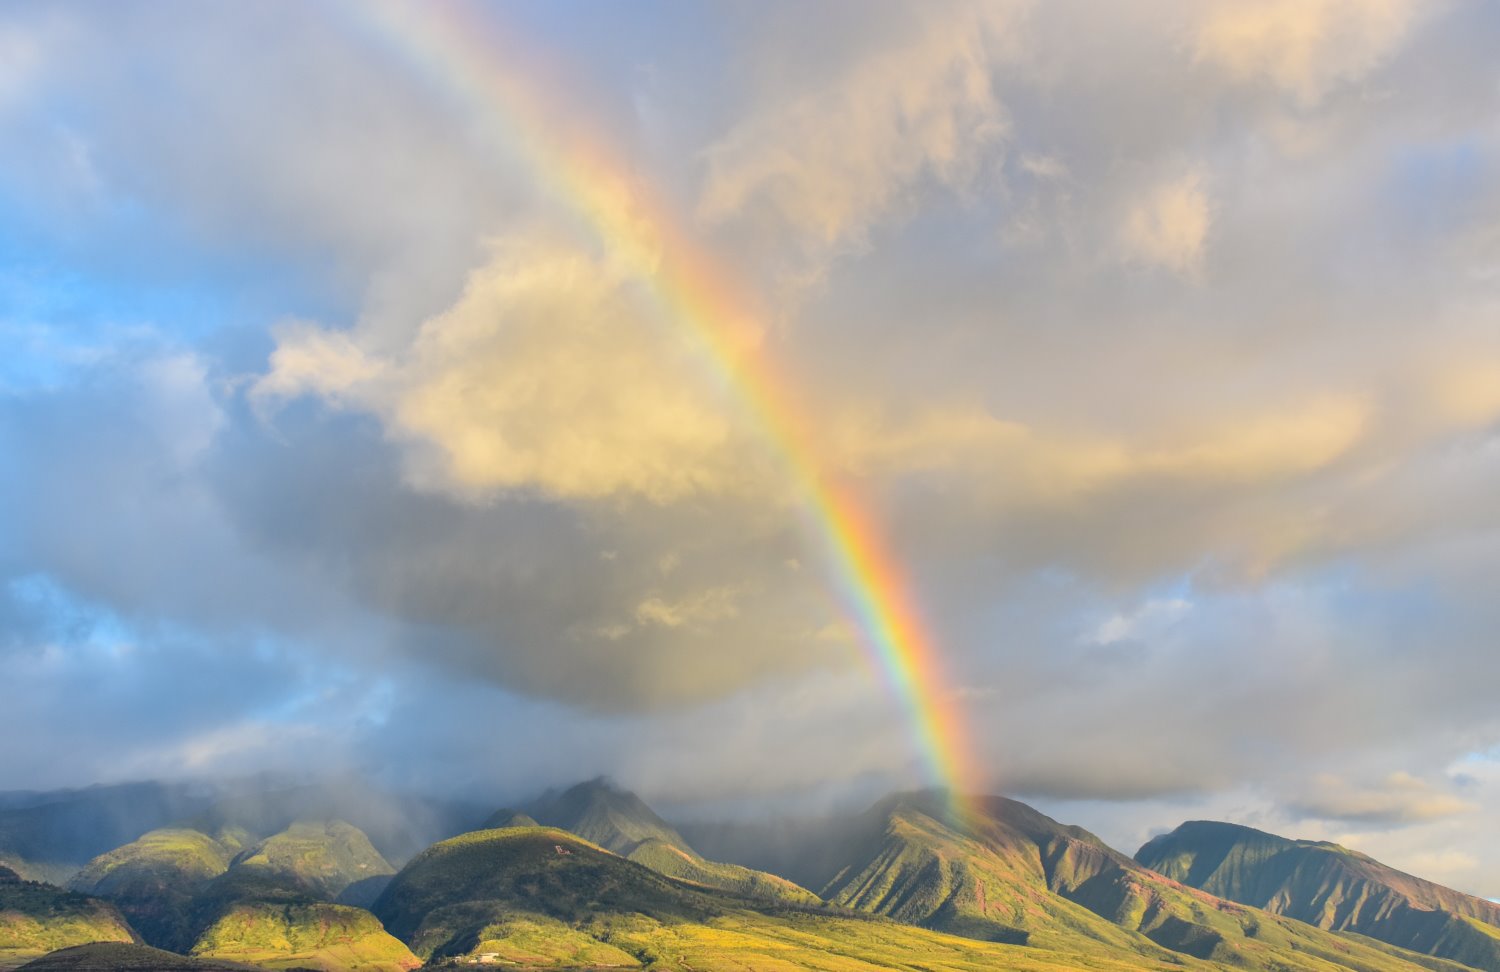 10 Easy Tips for Gorgeous Rainbow Photography